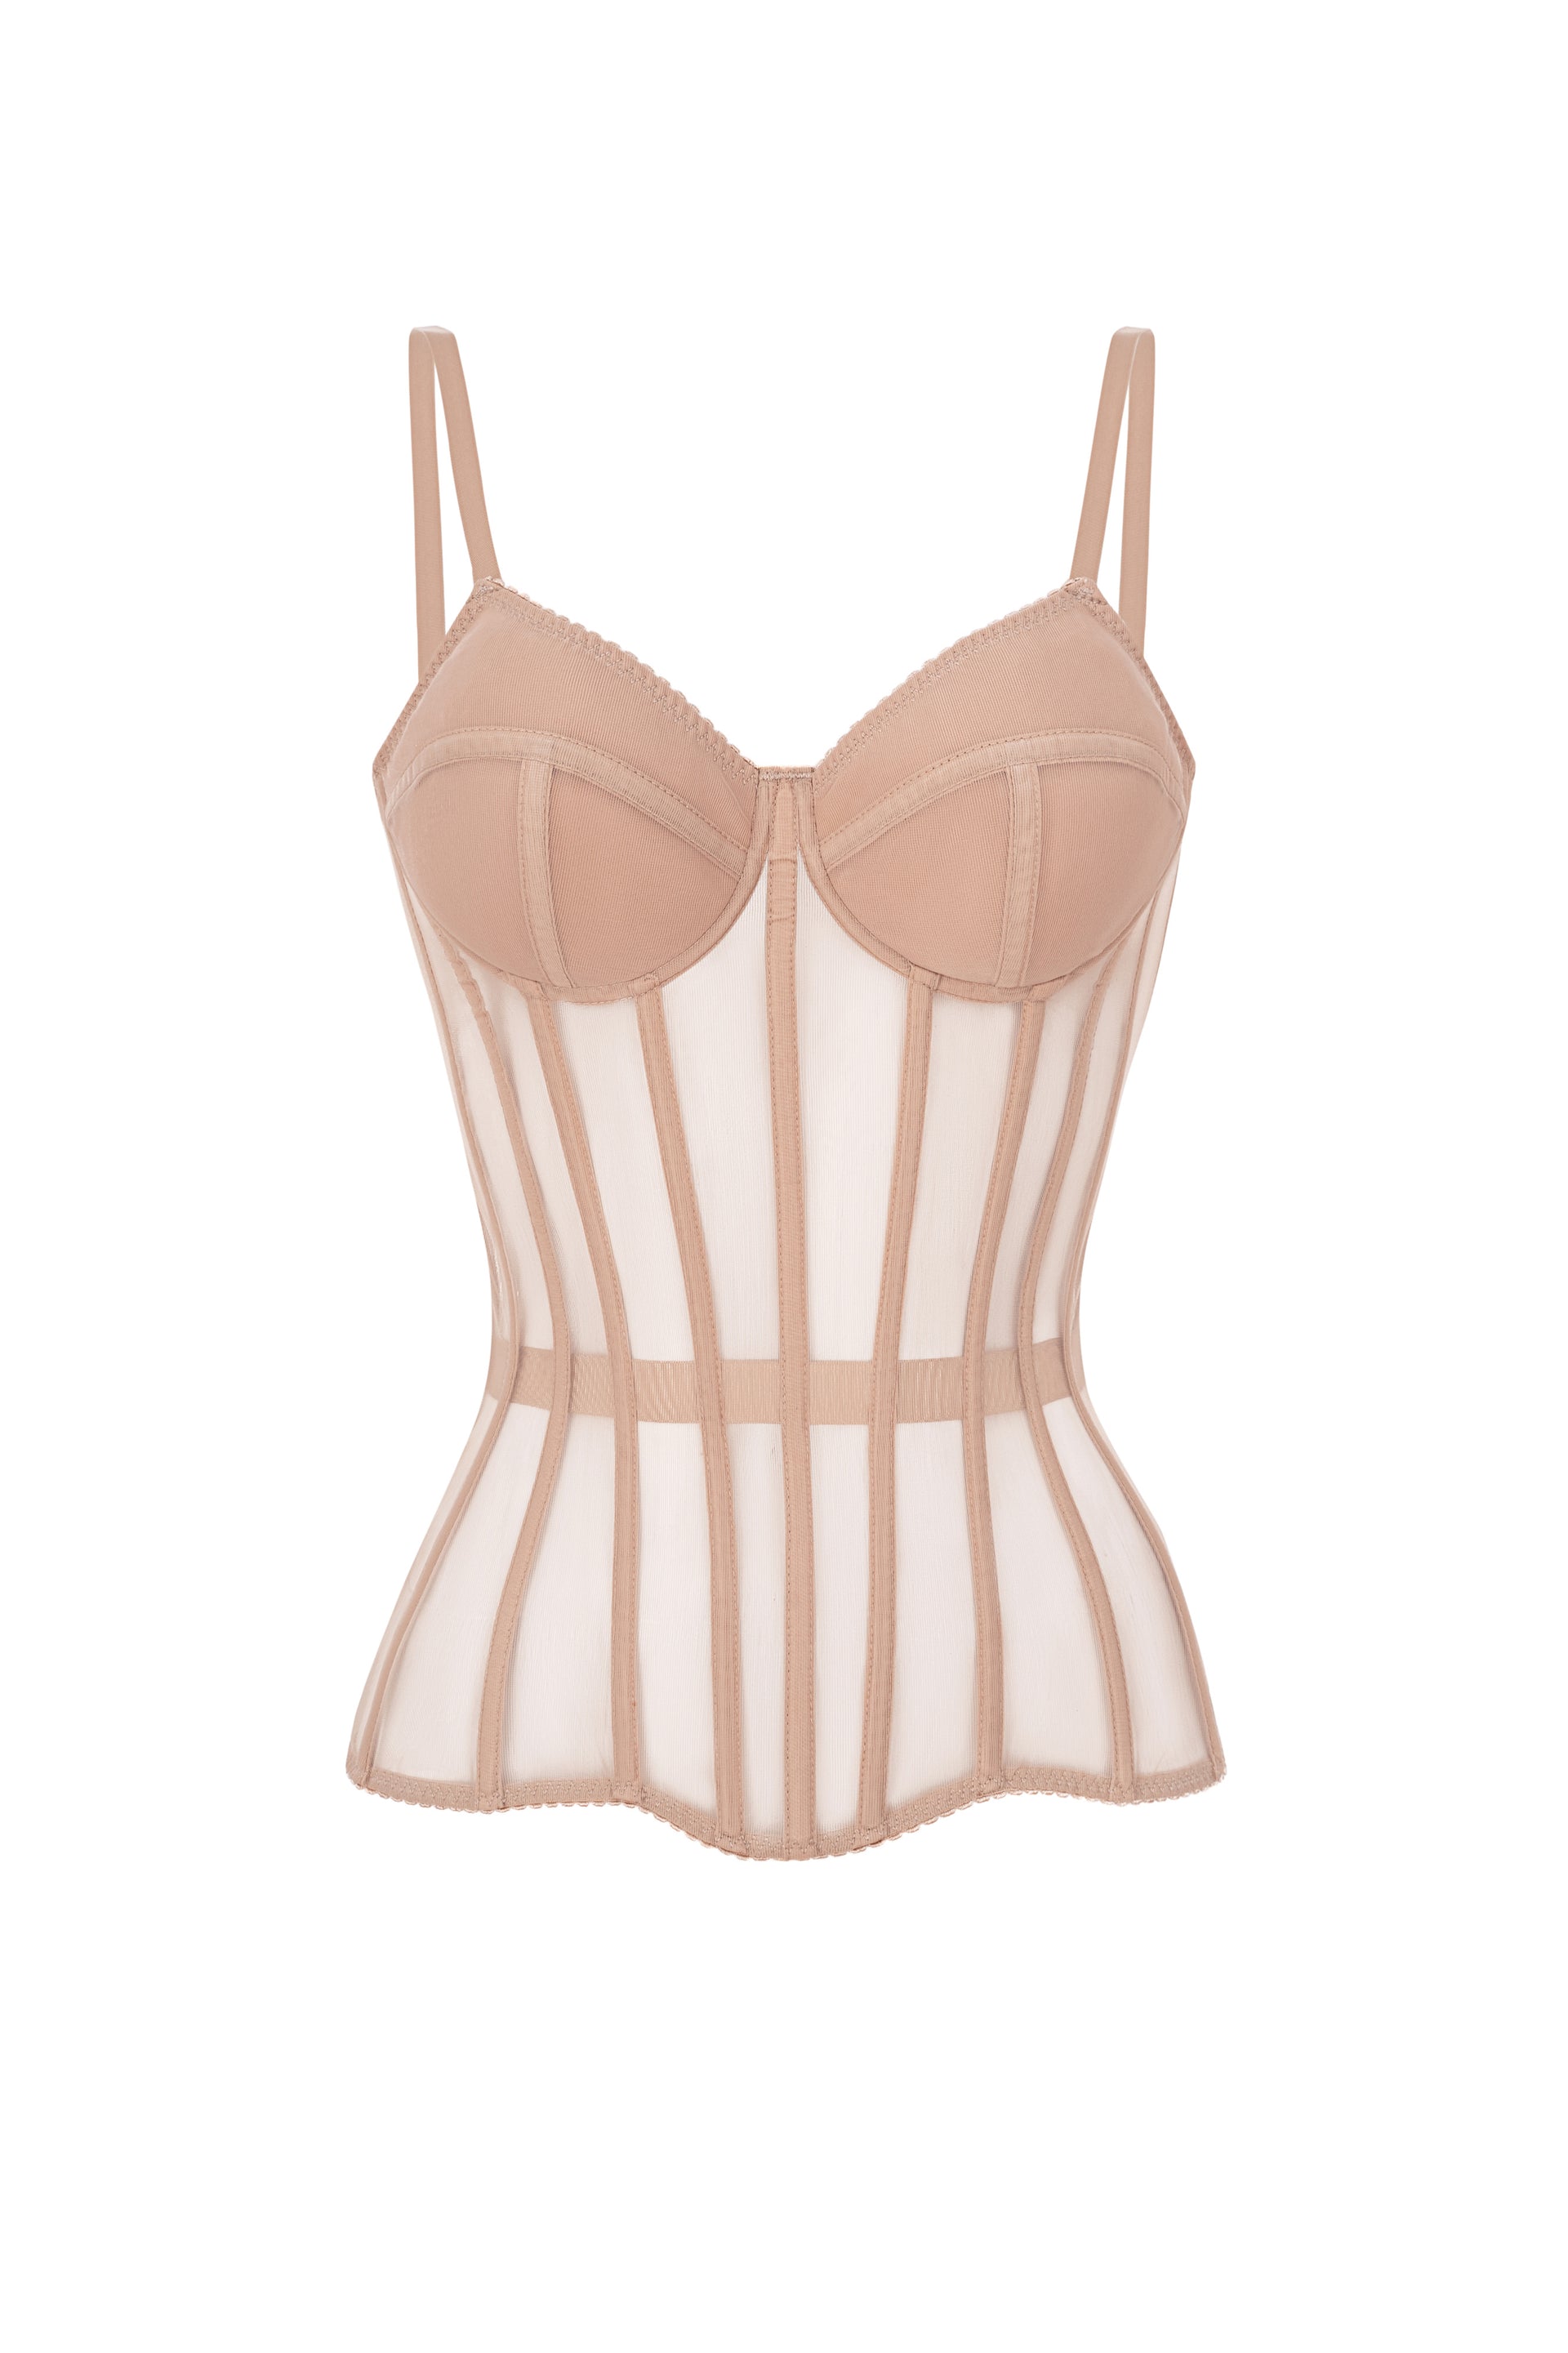 Beige corset with transparent cups - STATNAIA